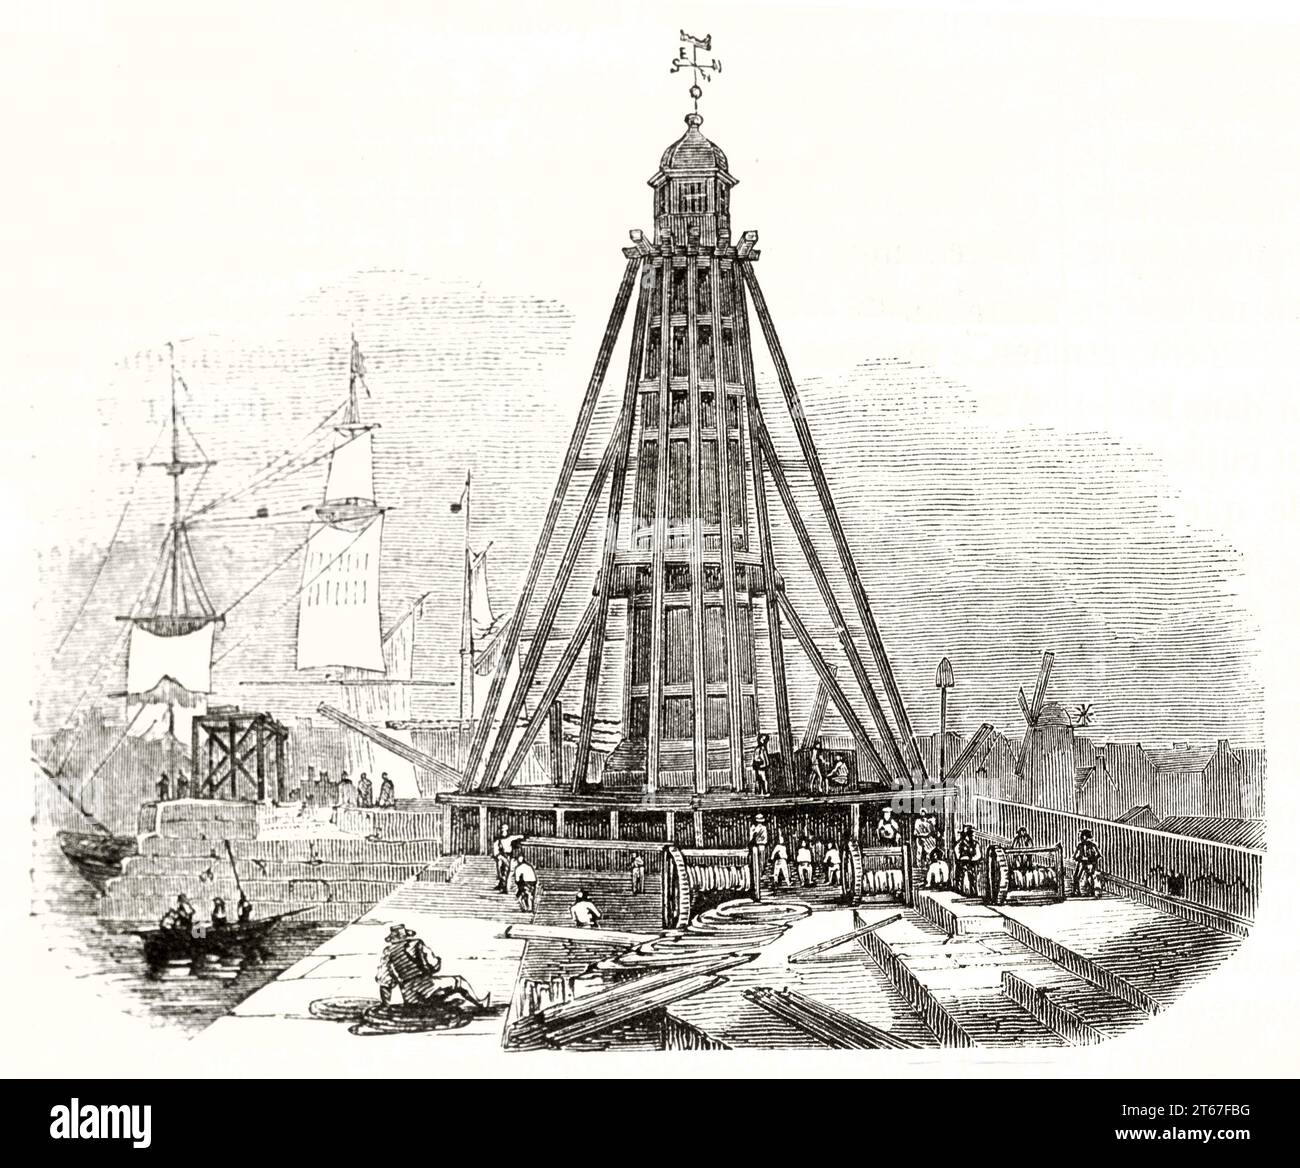 Old illustration of Sunderland lighthouse and lifting scaffold. By unidentified author, publ. on Magasin Pittoresque, Paris, 1851 Stock Photo